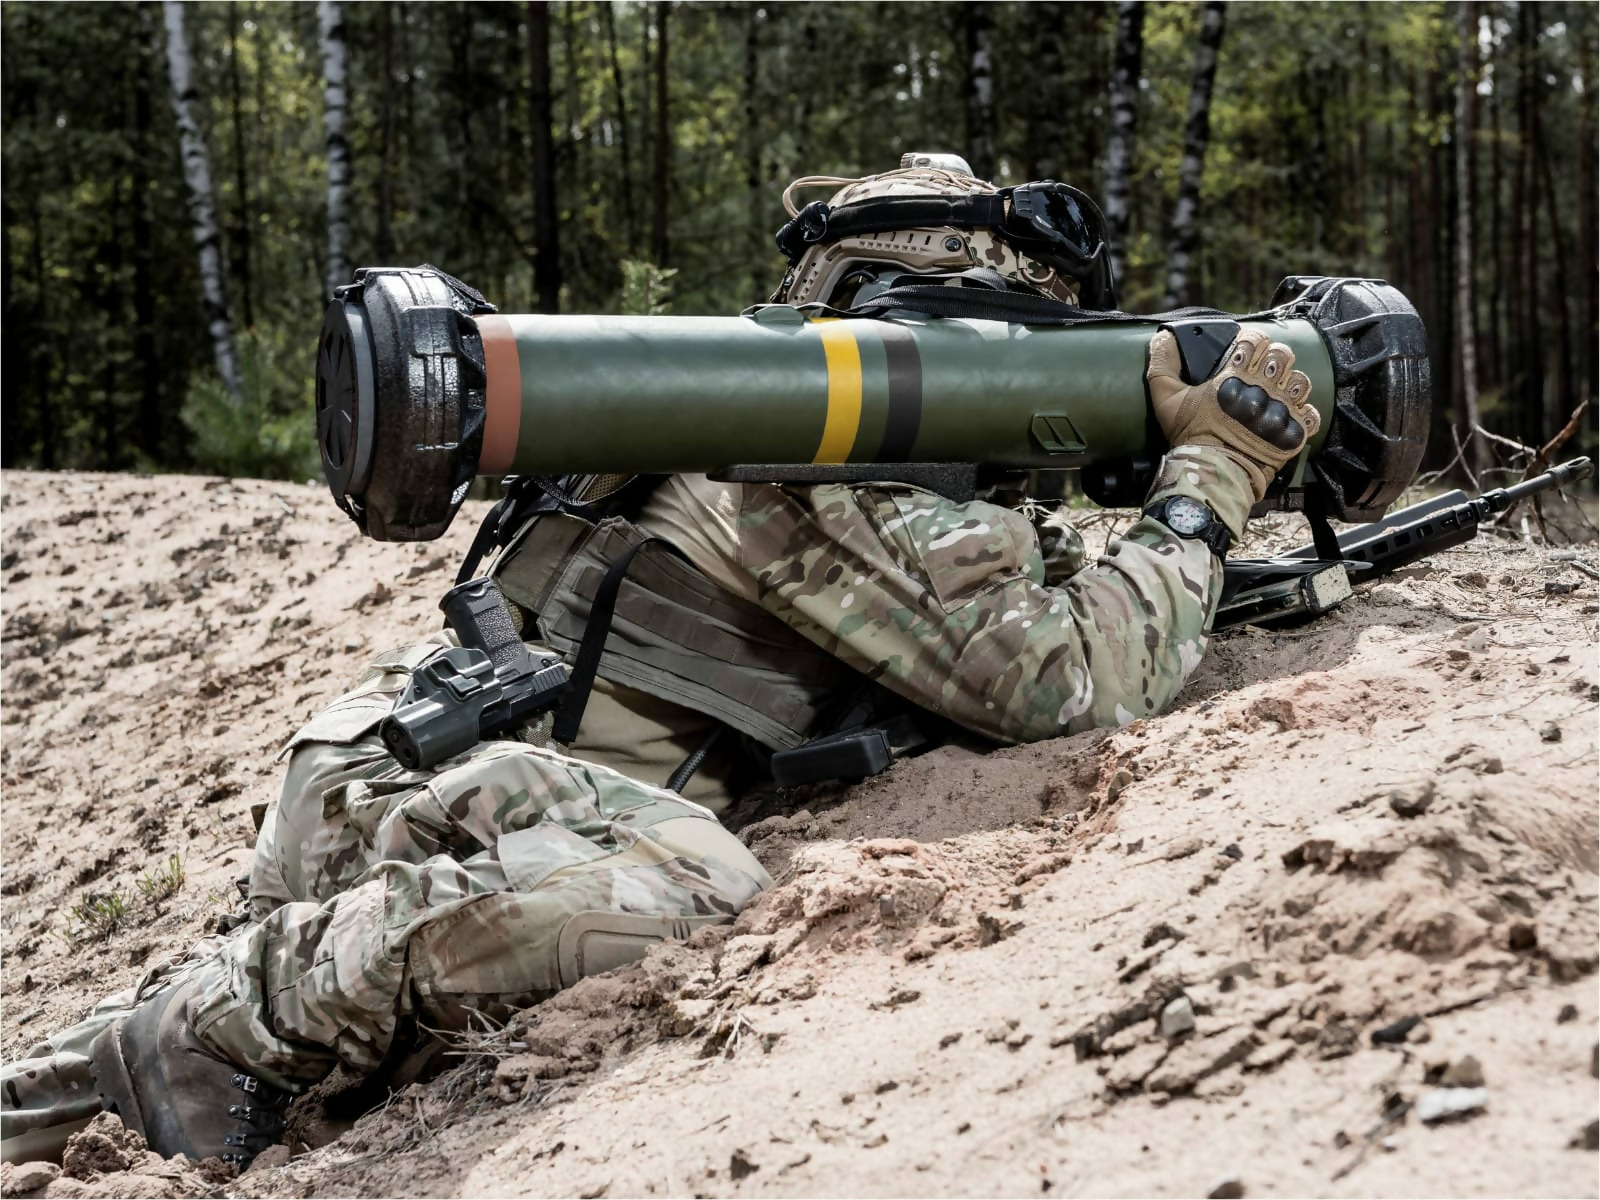 The Spike anti-tank guided missile launcher is poised to be a game-changer....